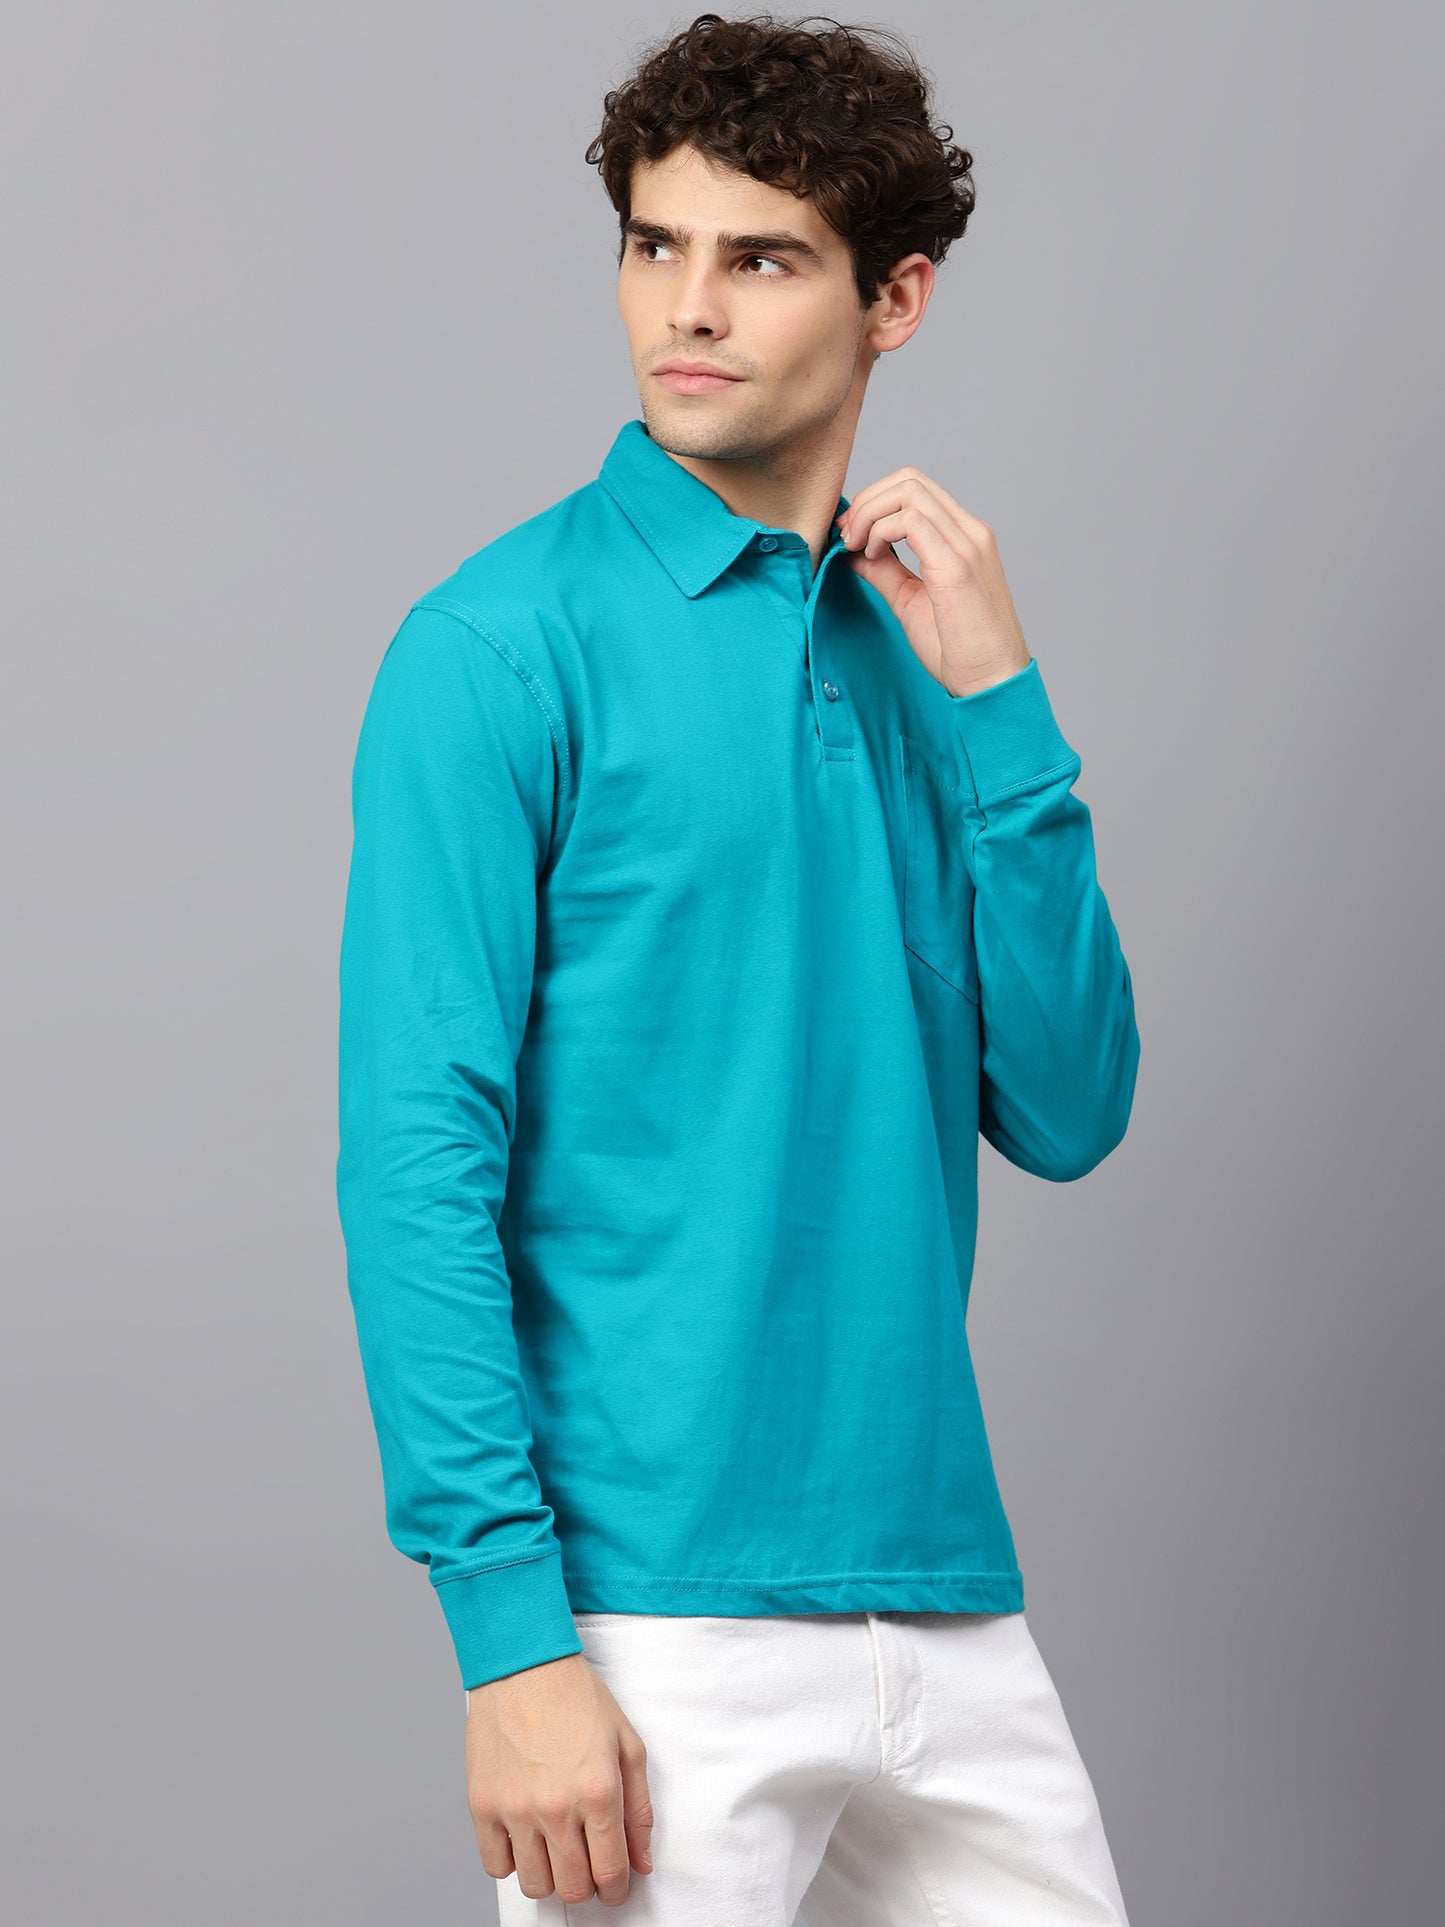 Men's Polo Neck Full Sleeve T-Shirt Pick any 2, 4, 5, 8, 10 Pieces